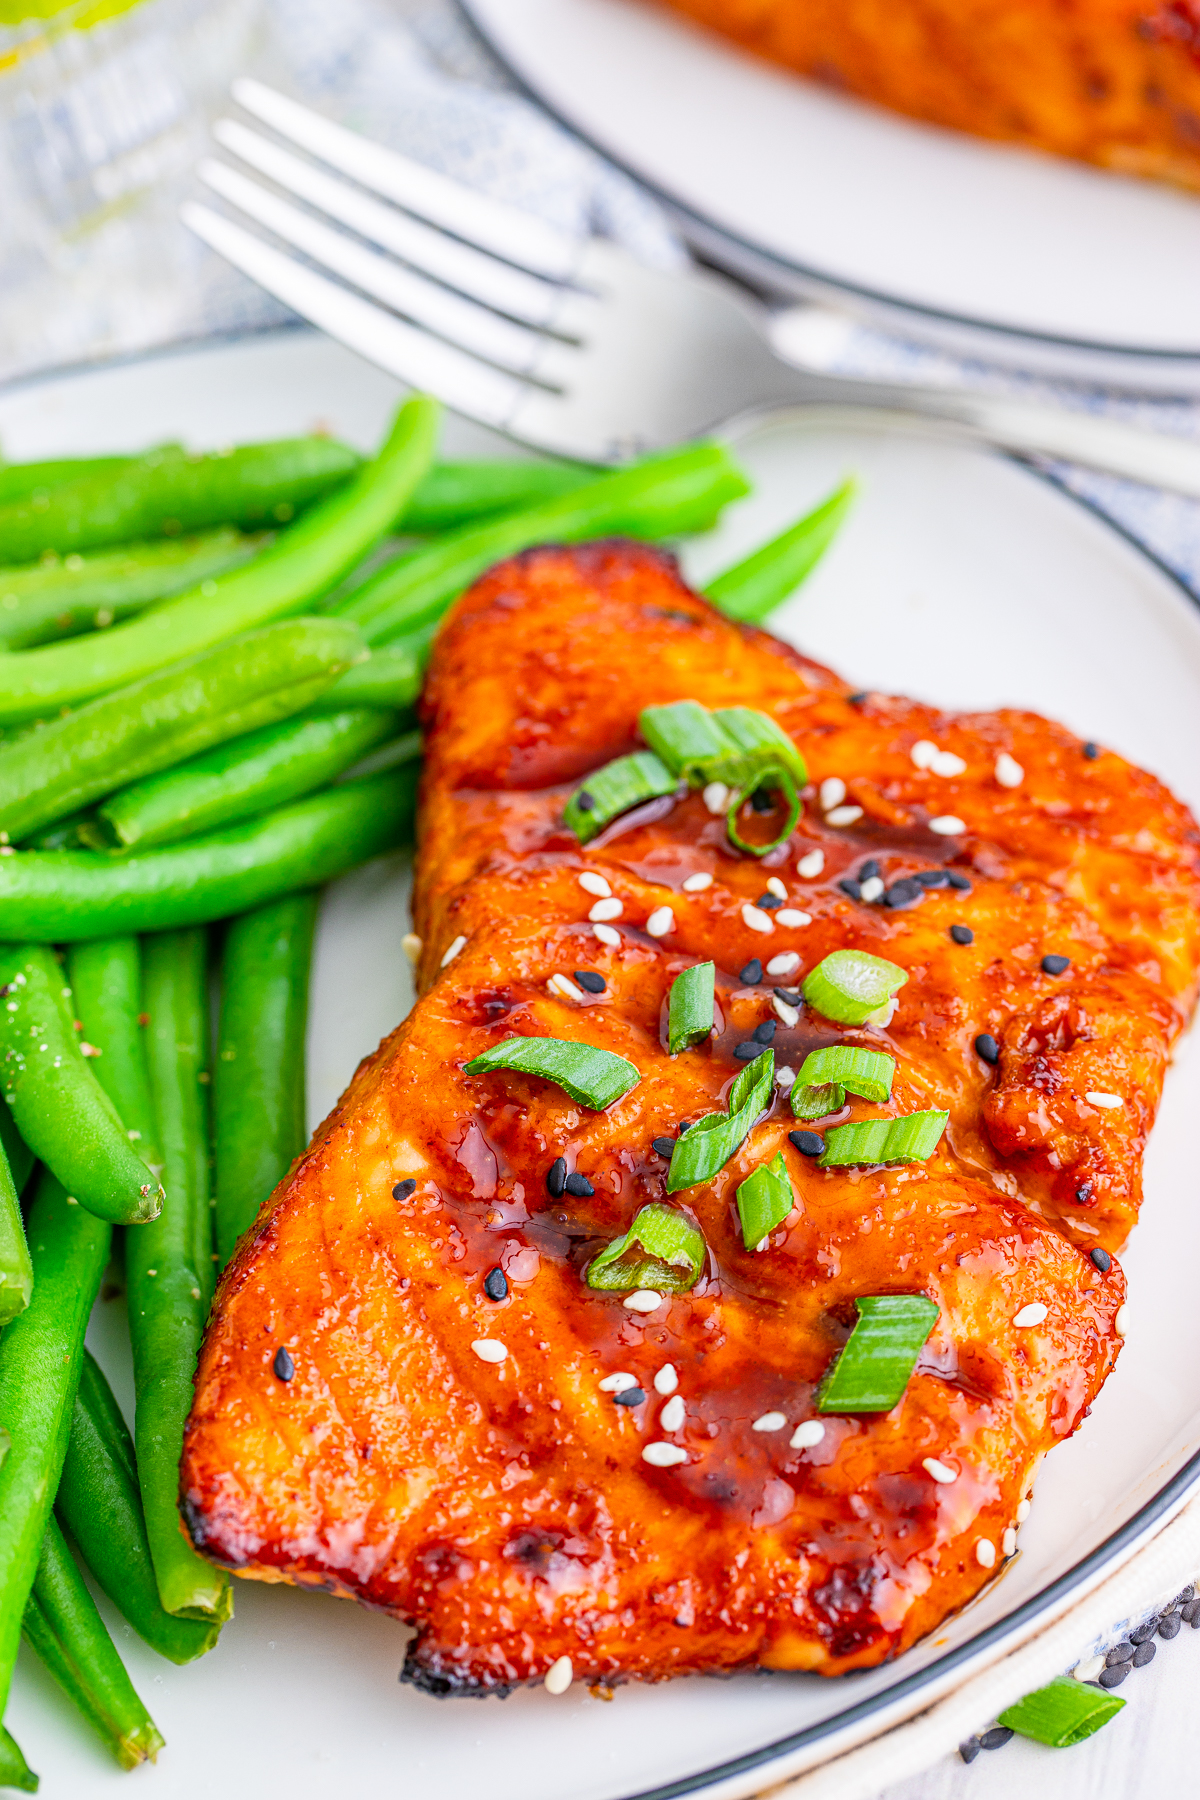 Overhead of Air Fryer Salmon Recipe showing garnishes on plate with green beans.